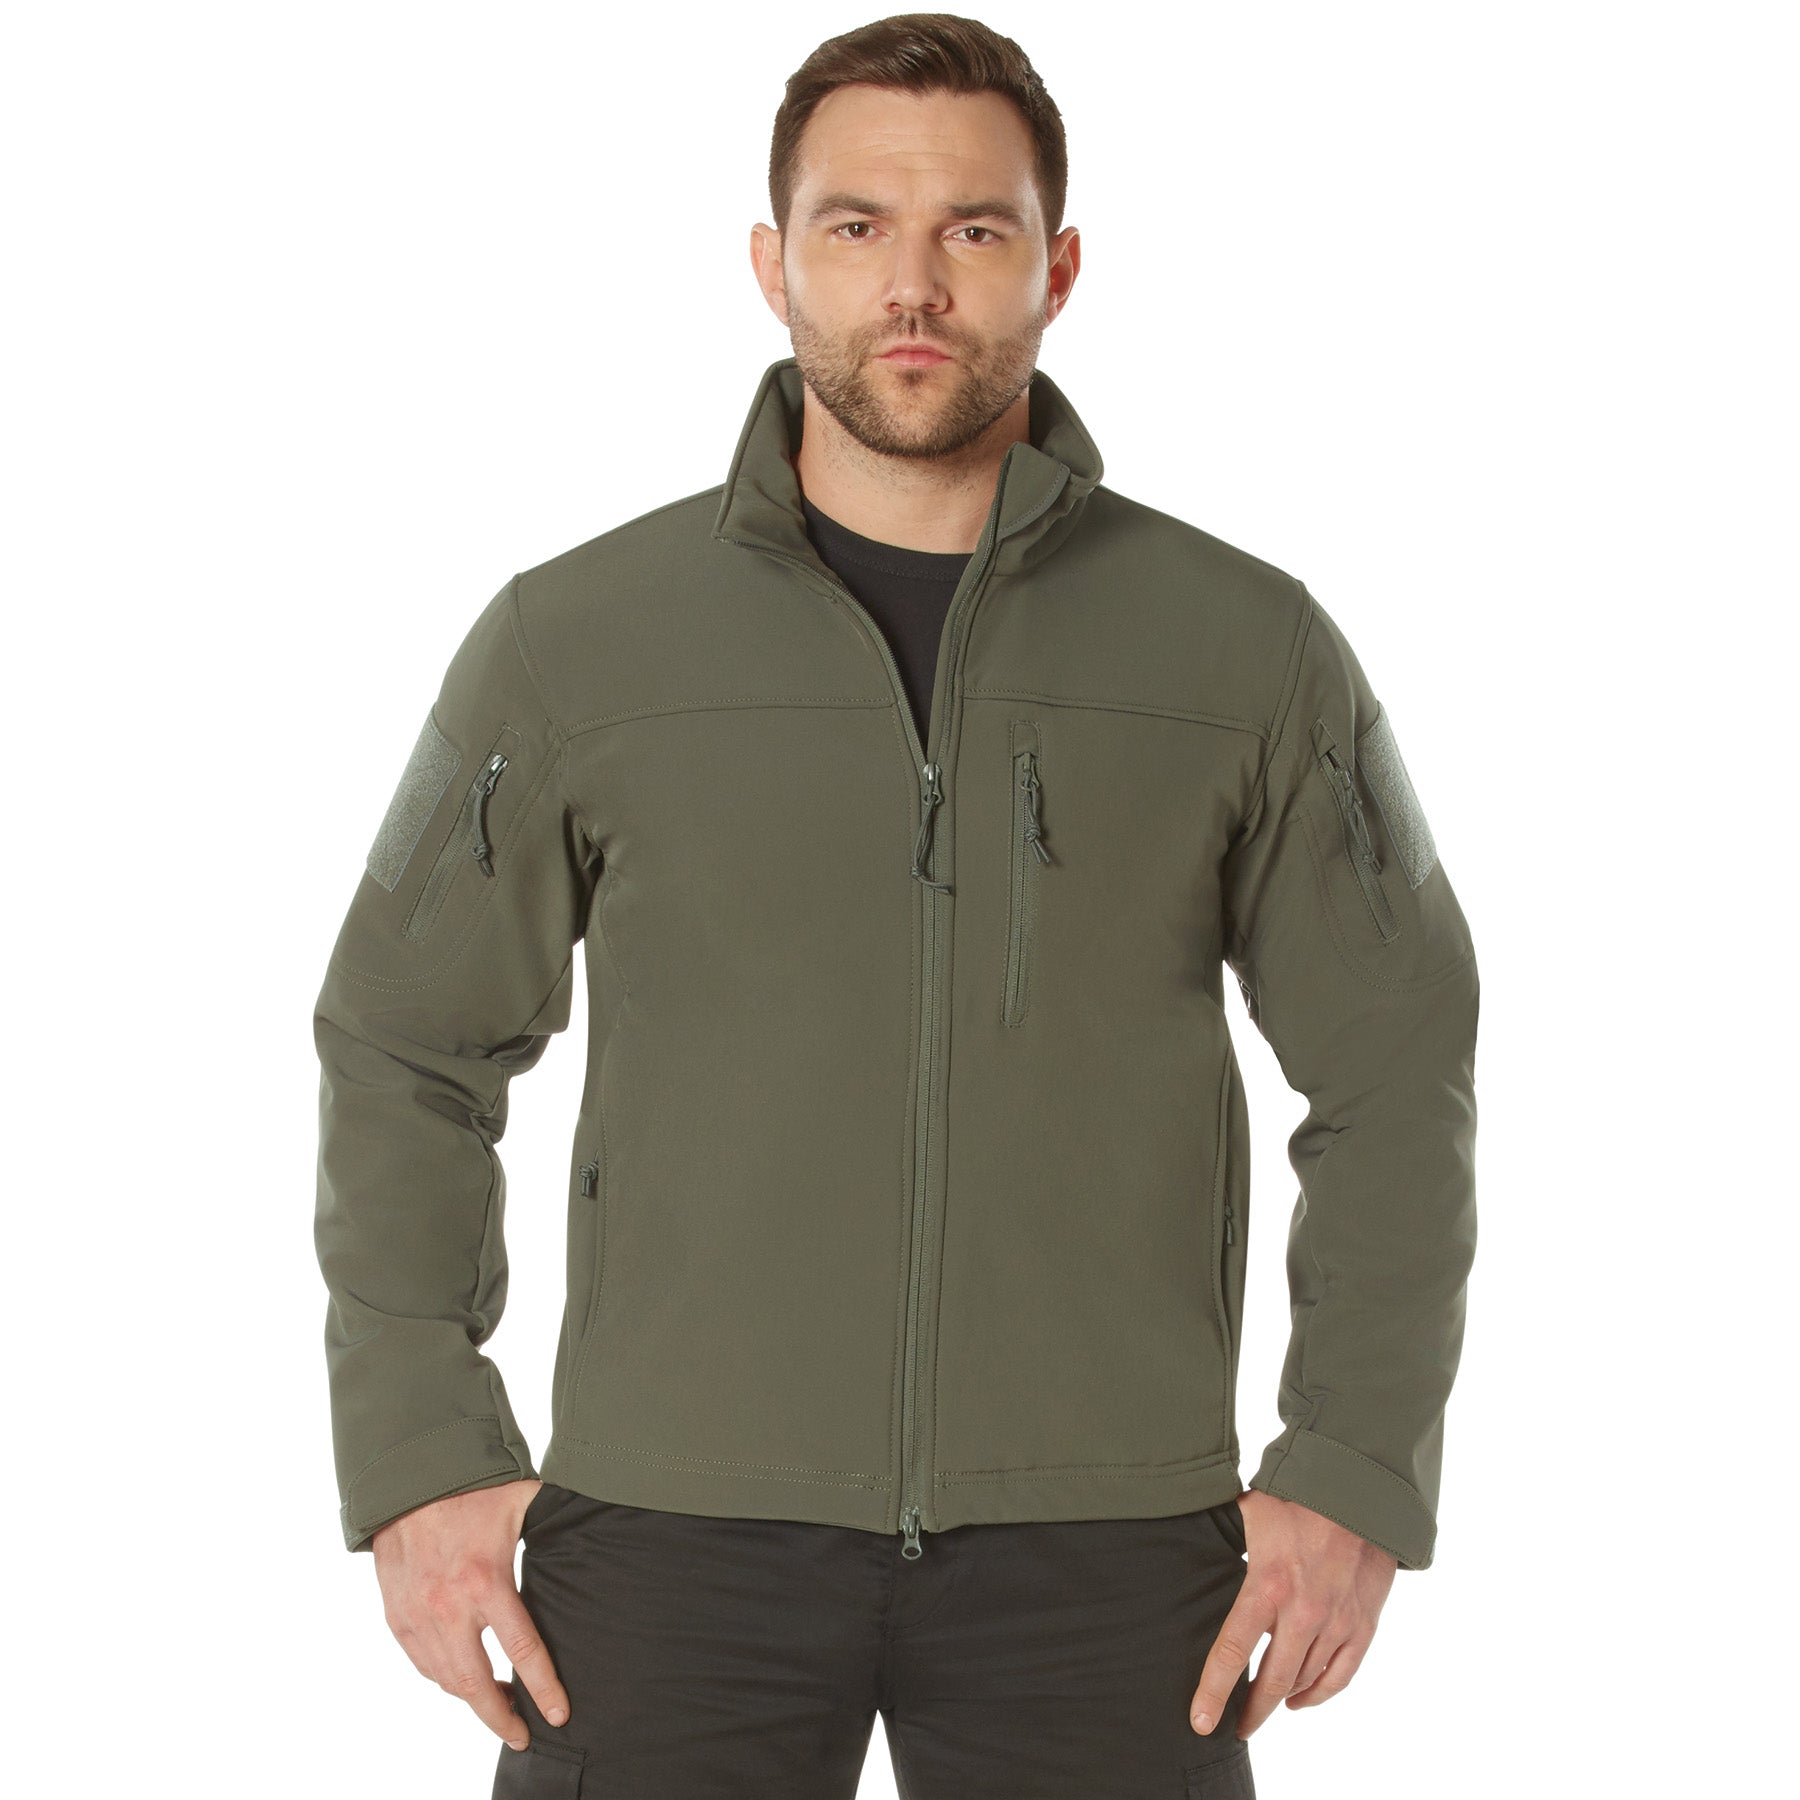 Poly Stealth Spec Ops Tactical Soft Shell Jackets Olive Drab